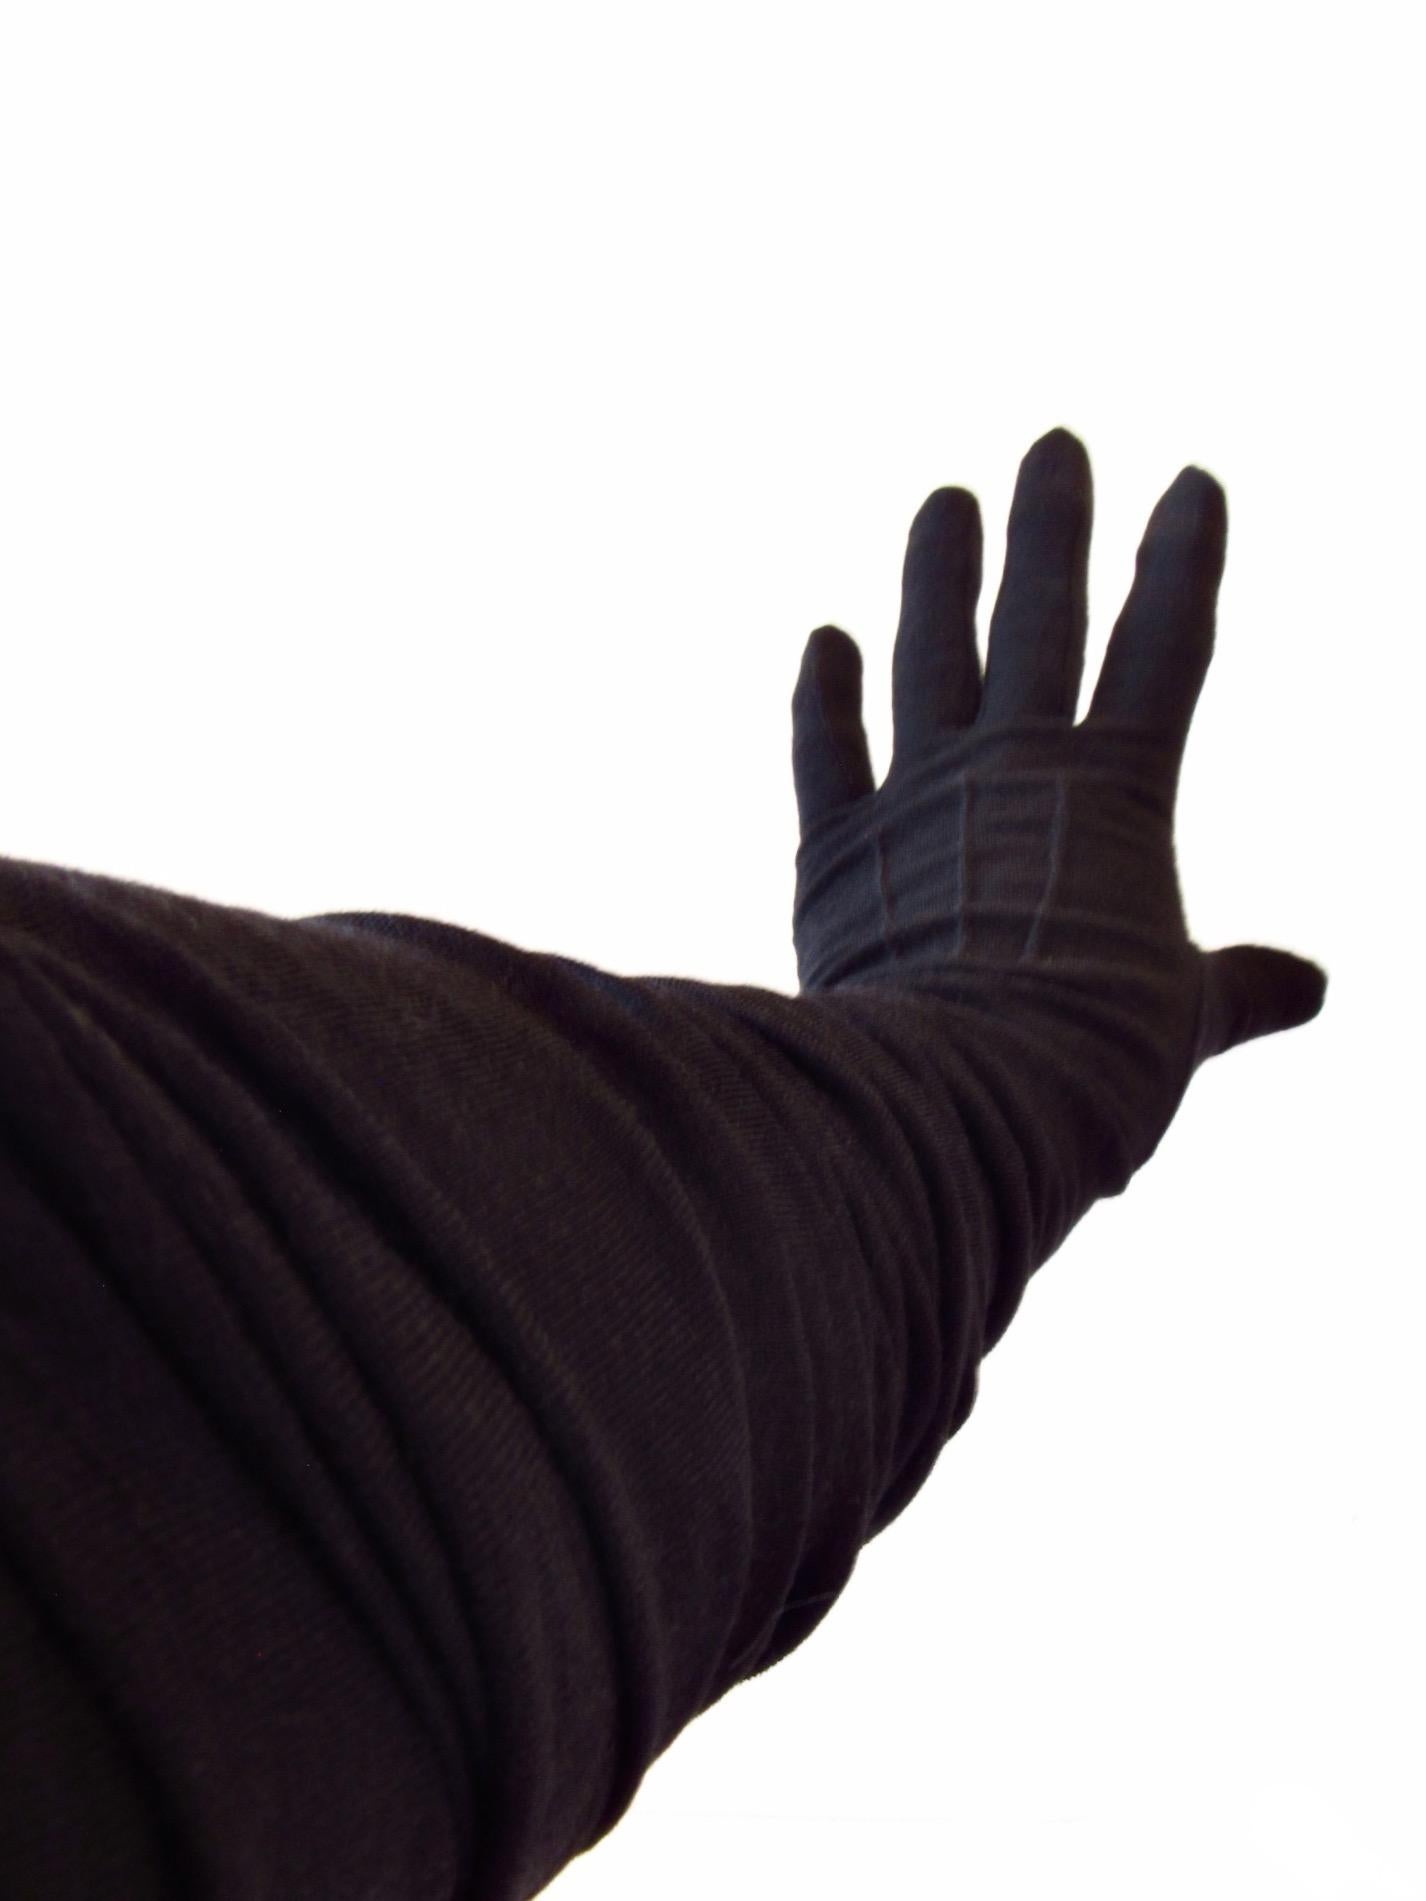 These are elegant and warm black wool opera-style gloves from Junya Watanabe. They measure 30 inches from tip of fingers to end. 